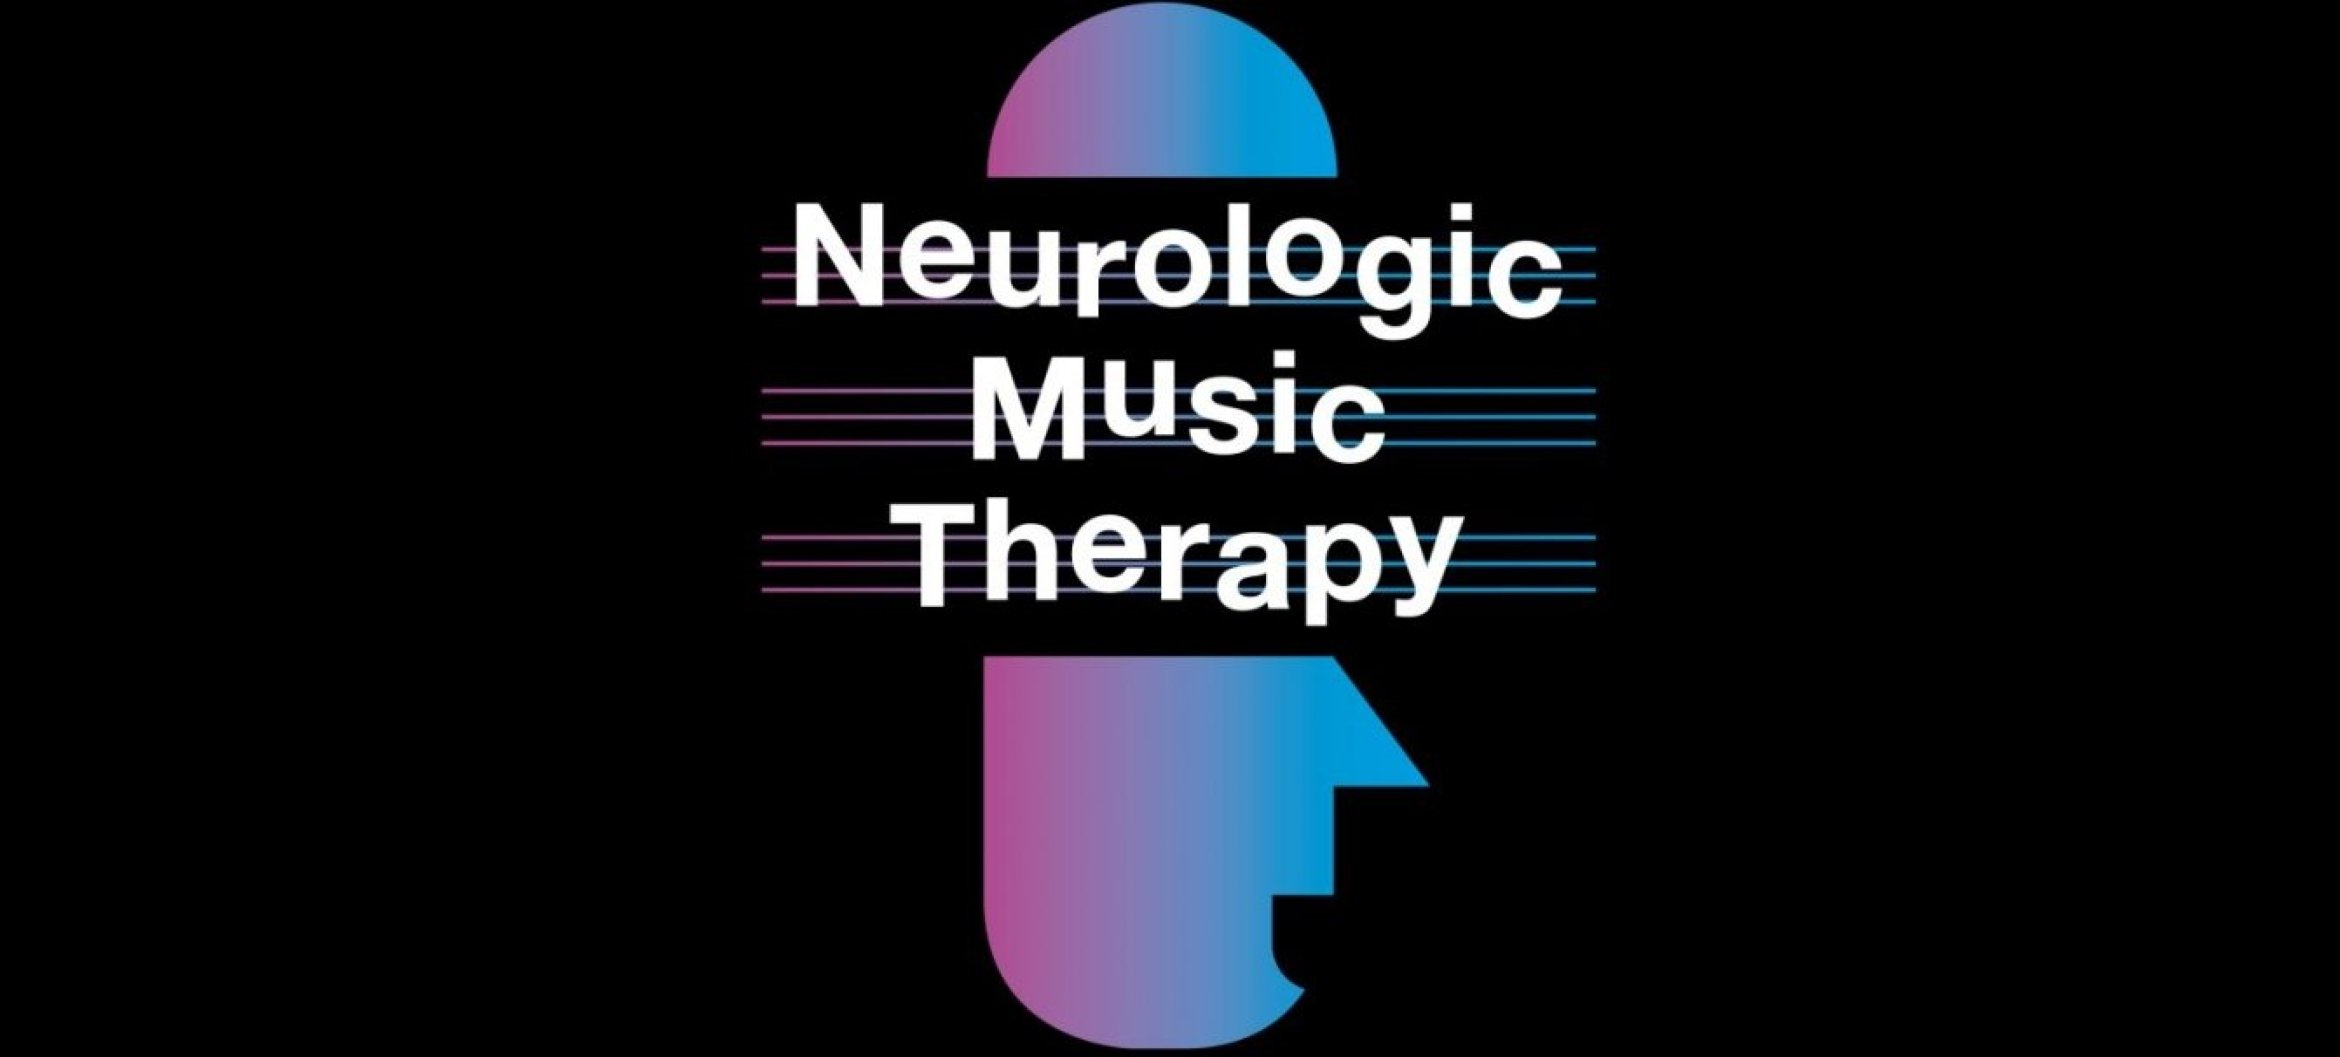 Neurologic Music Therapy (NMT) course